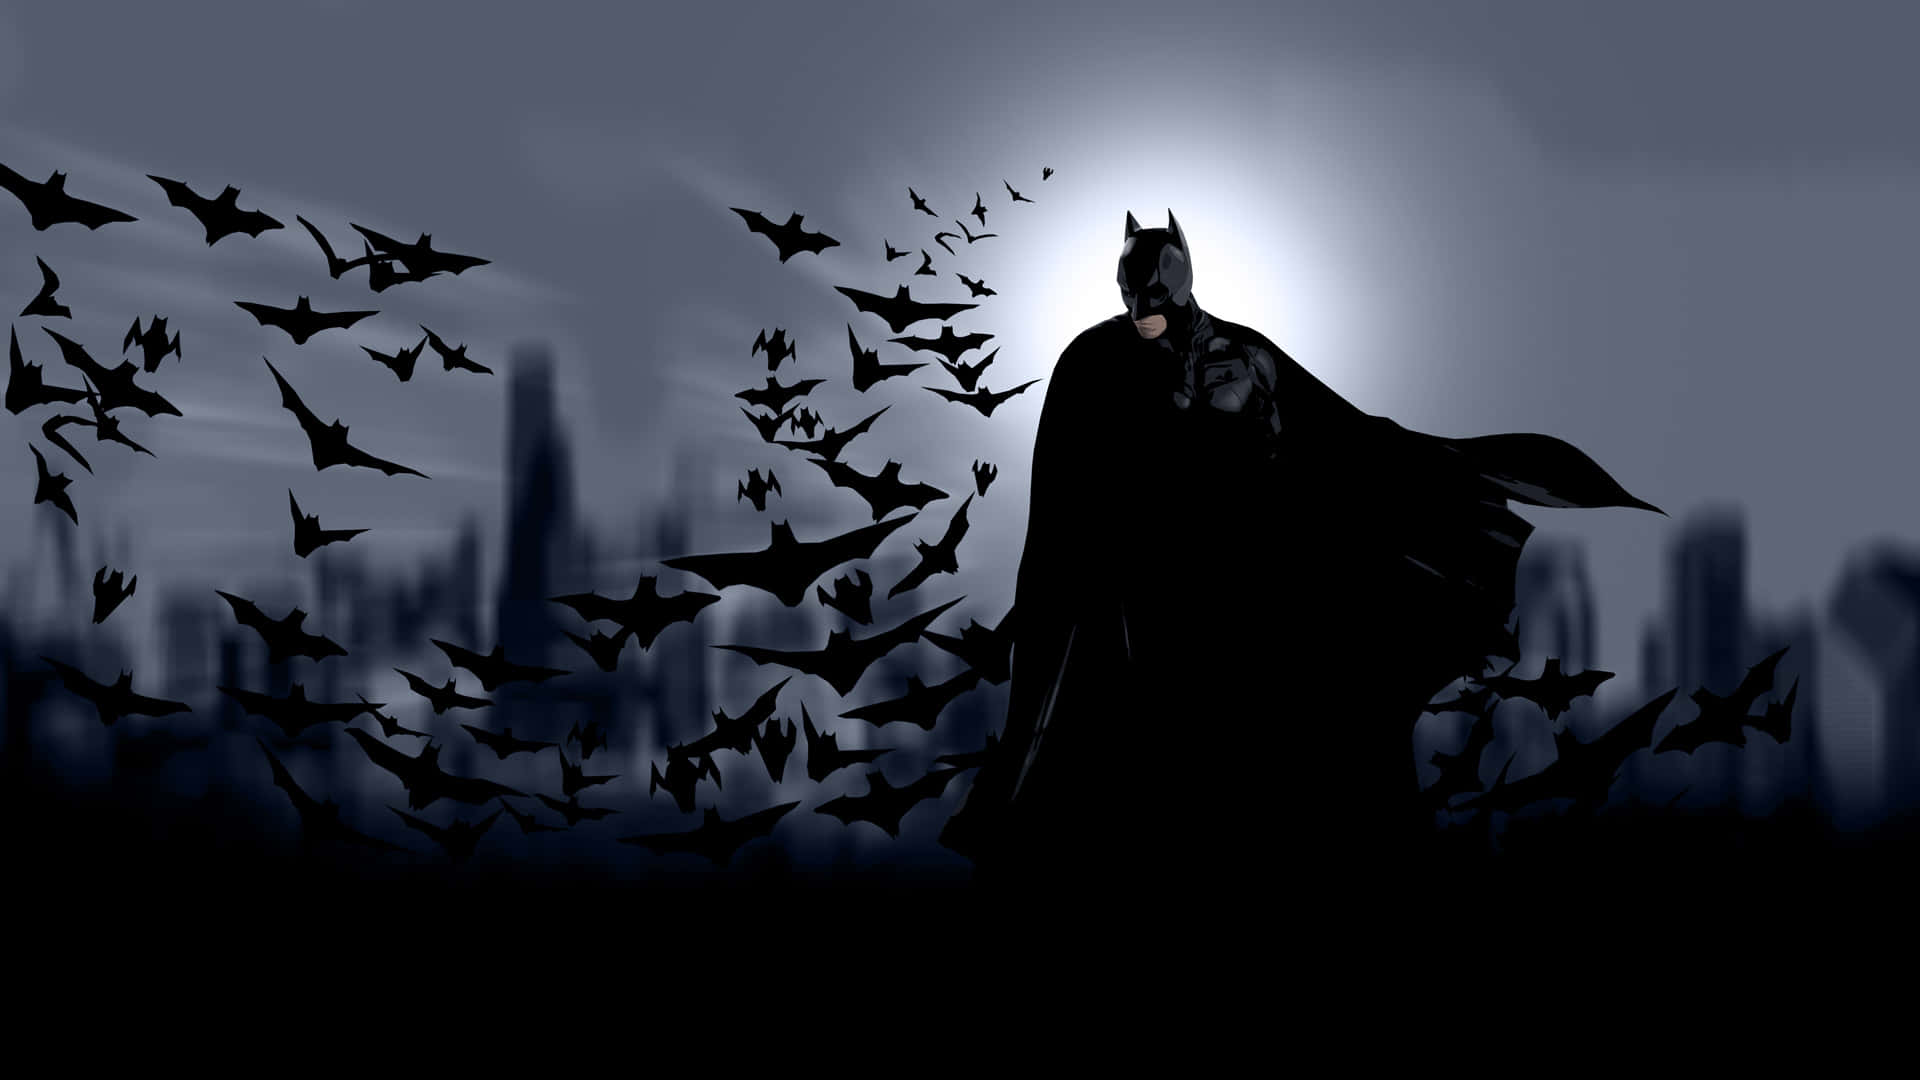 Batman Digital Art wallpaper  click it and wait a sec for high resolution  then save it   riphonewallpapers